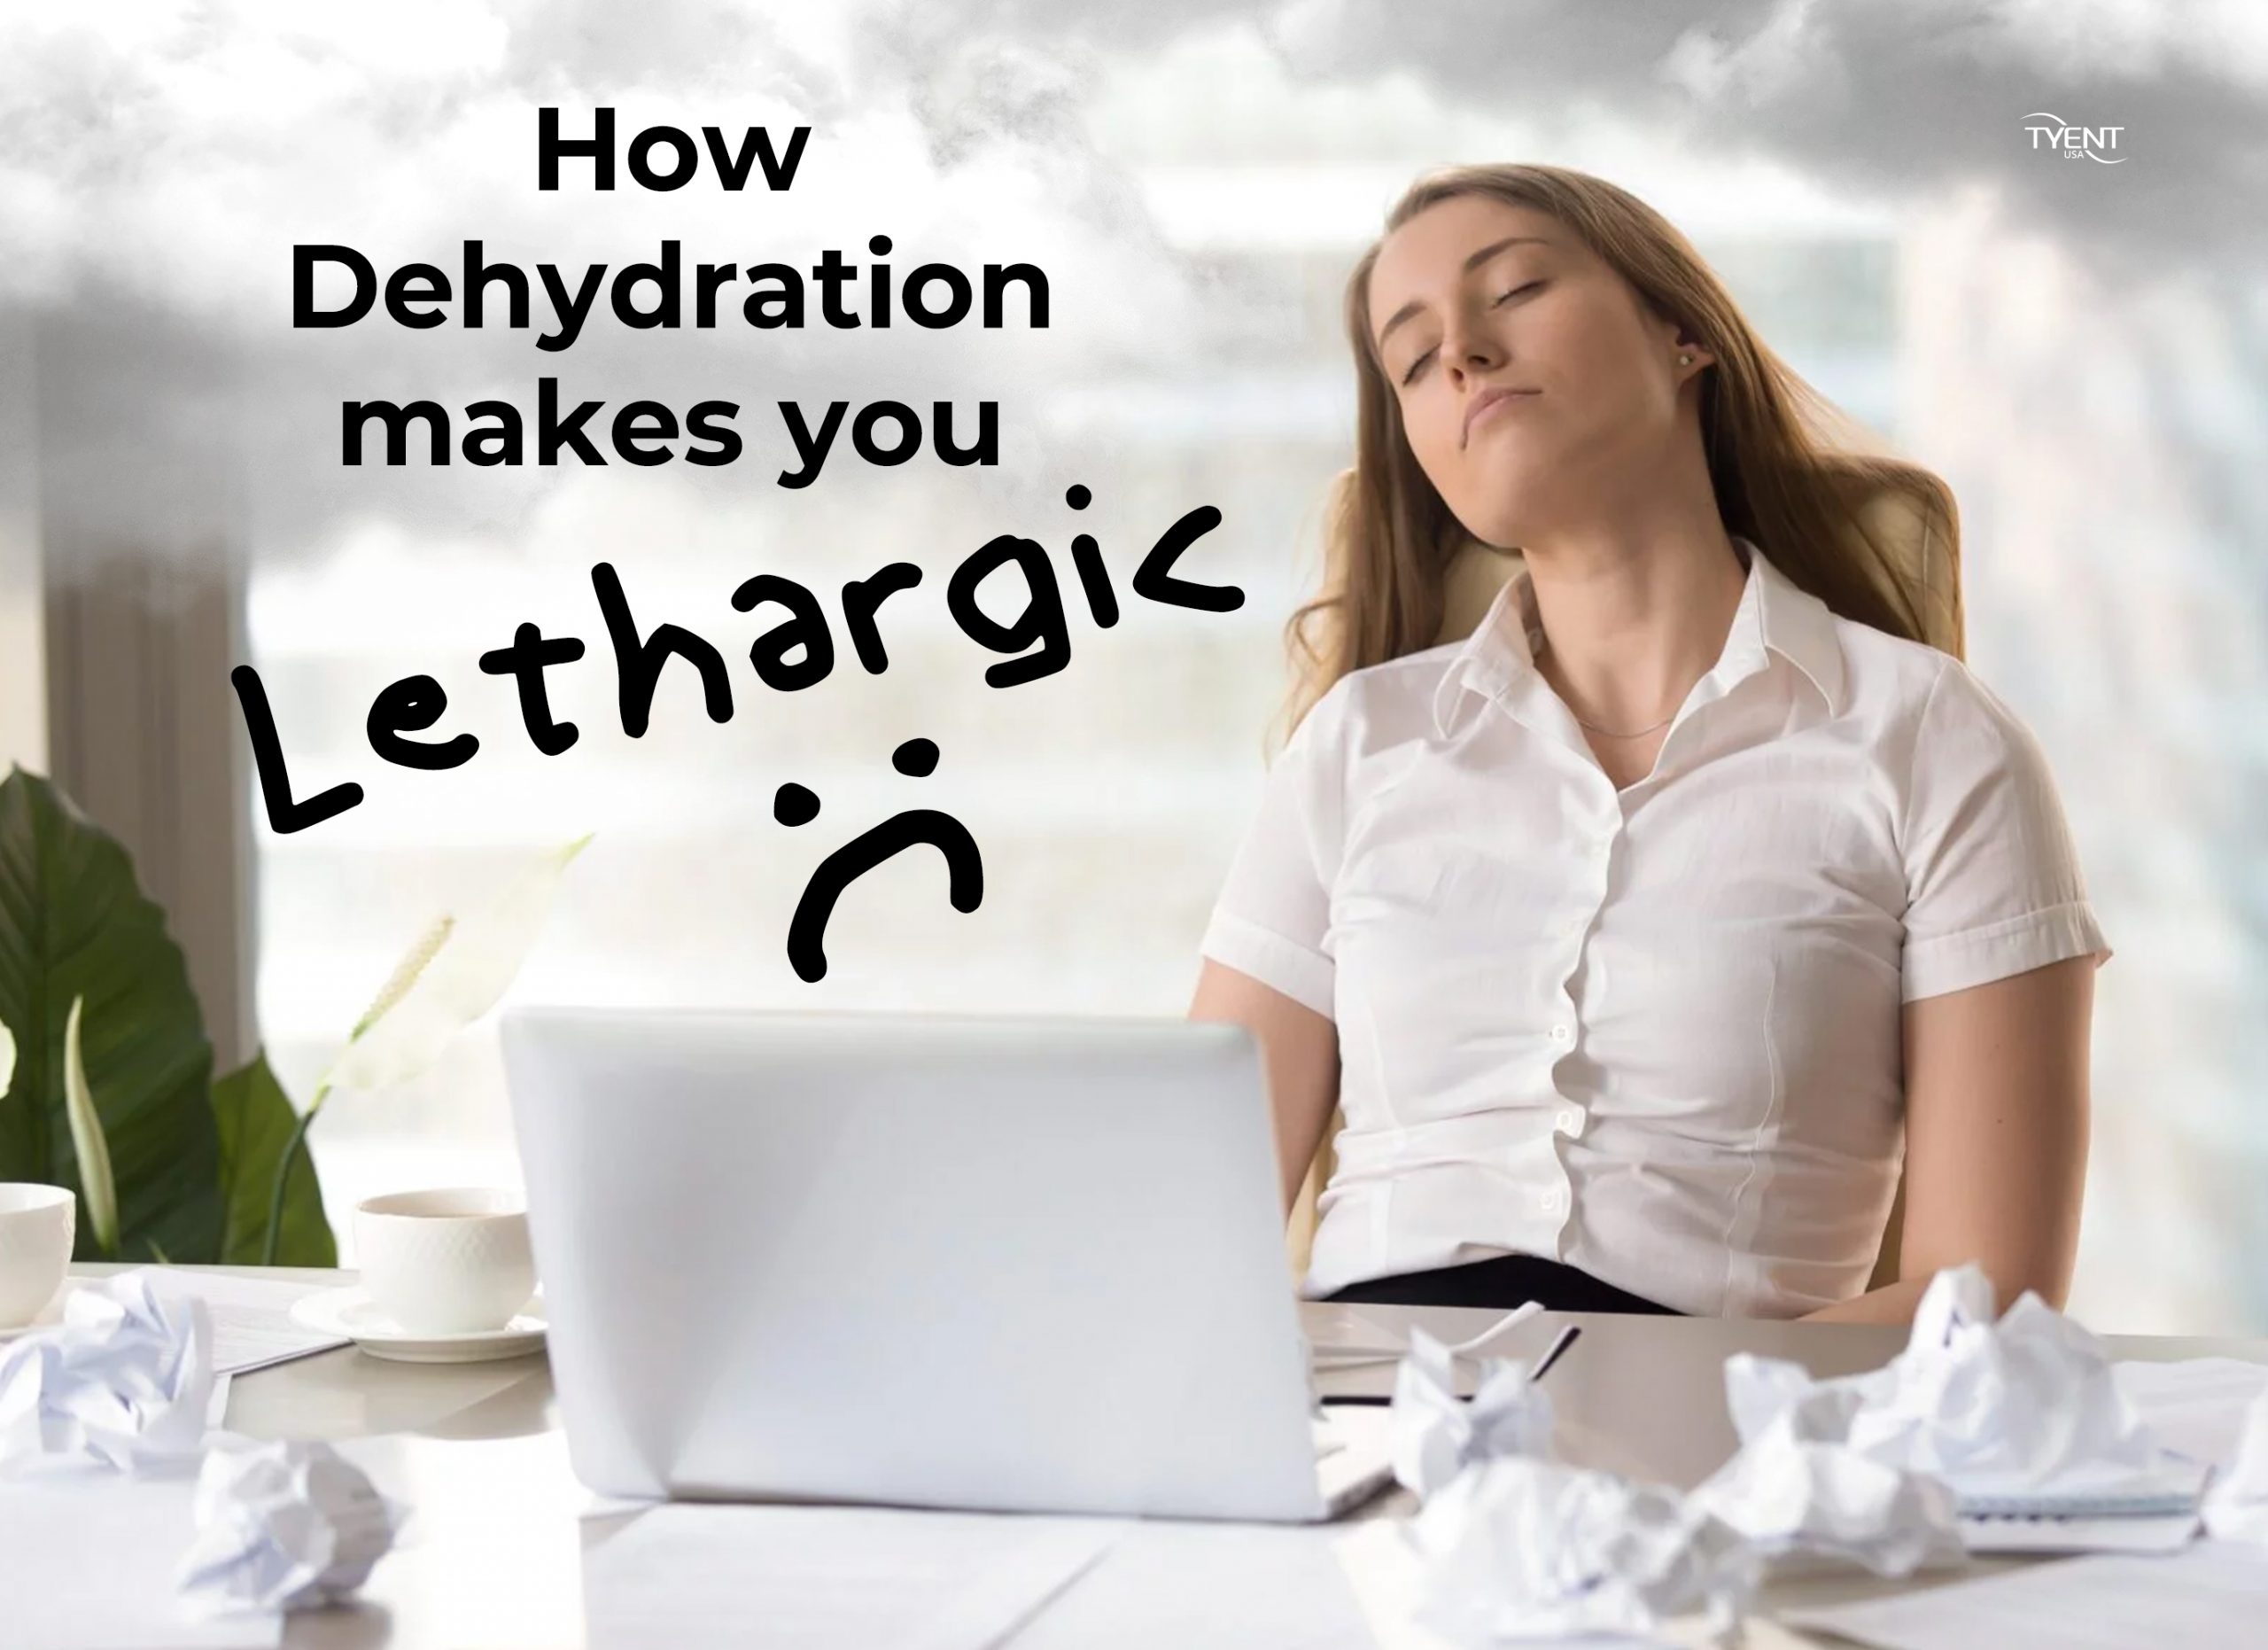 How Dehydration makes you lethargic